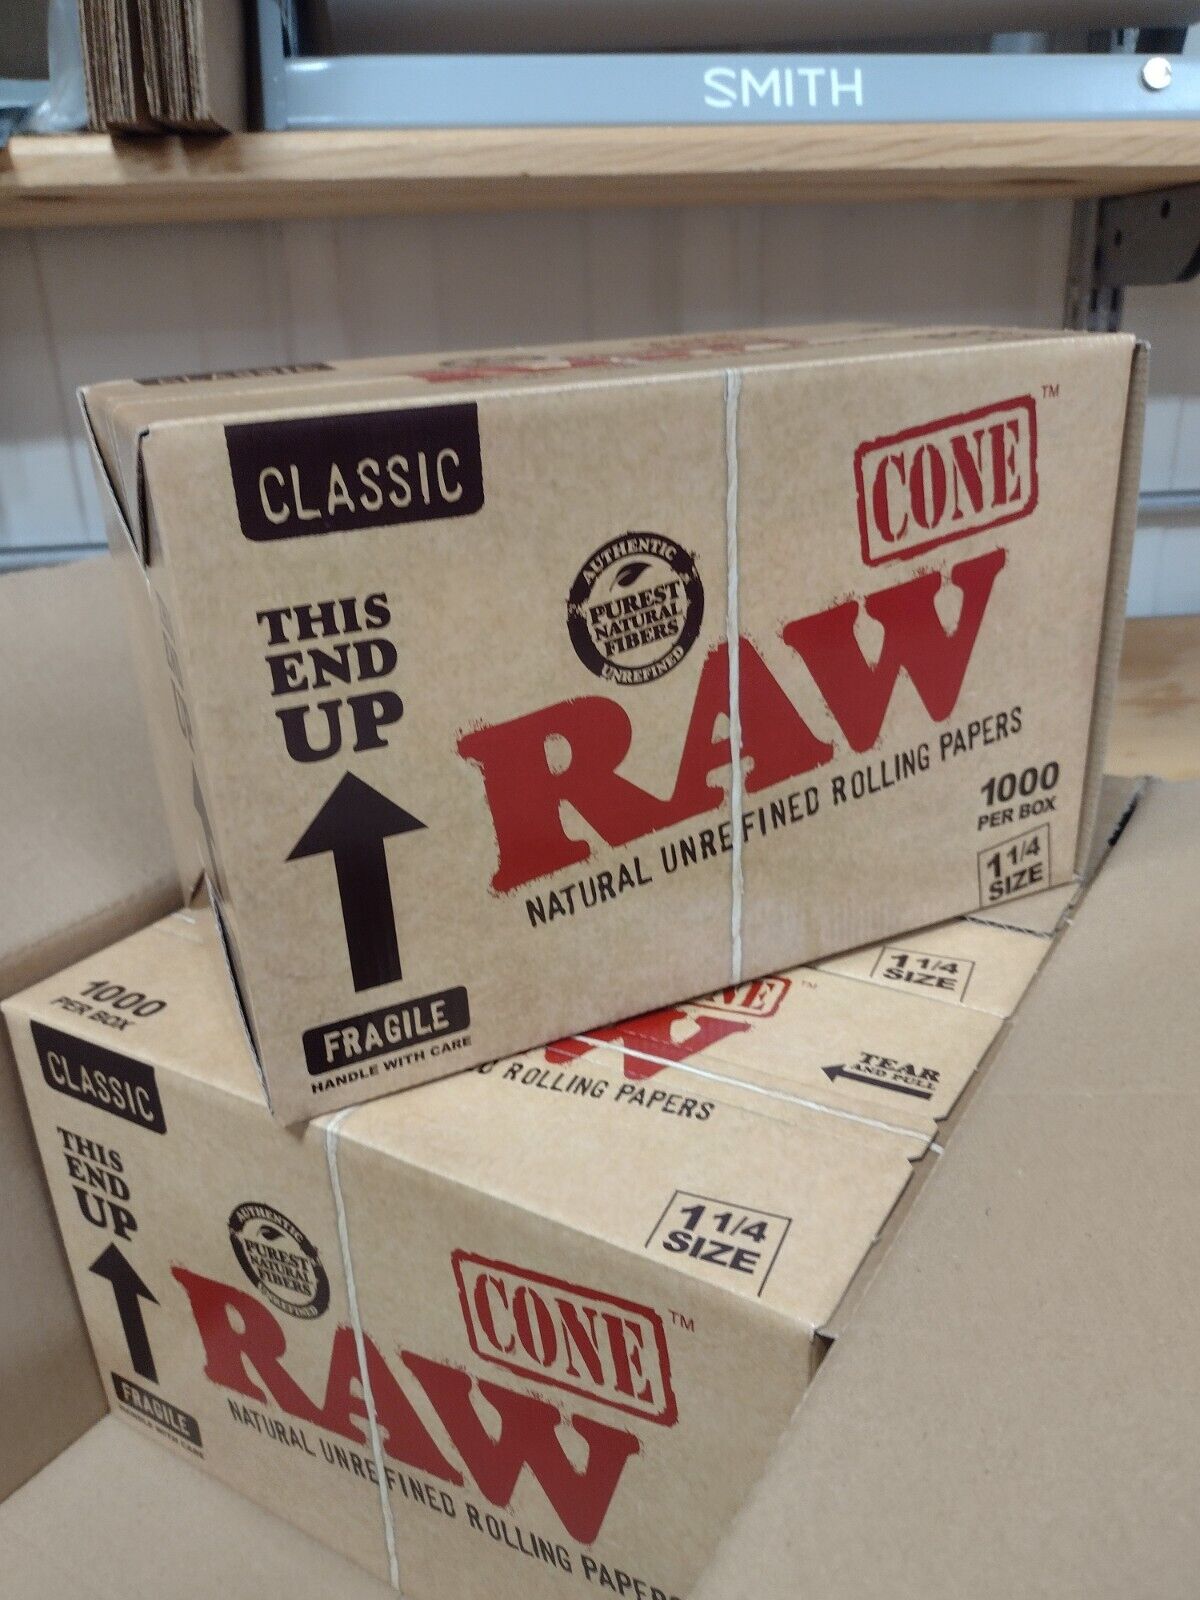 RAW Classic -1000 Cones - 1 1/4 Pre-Rolled Cones1000 - BULK BUY - FAST SHIPPING